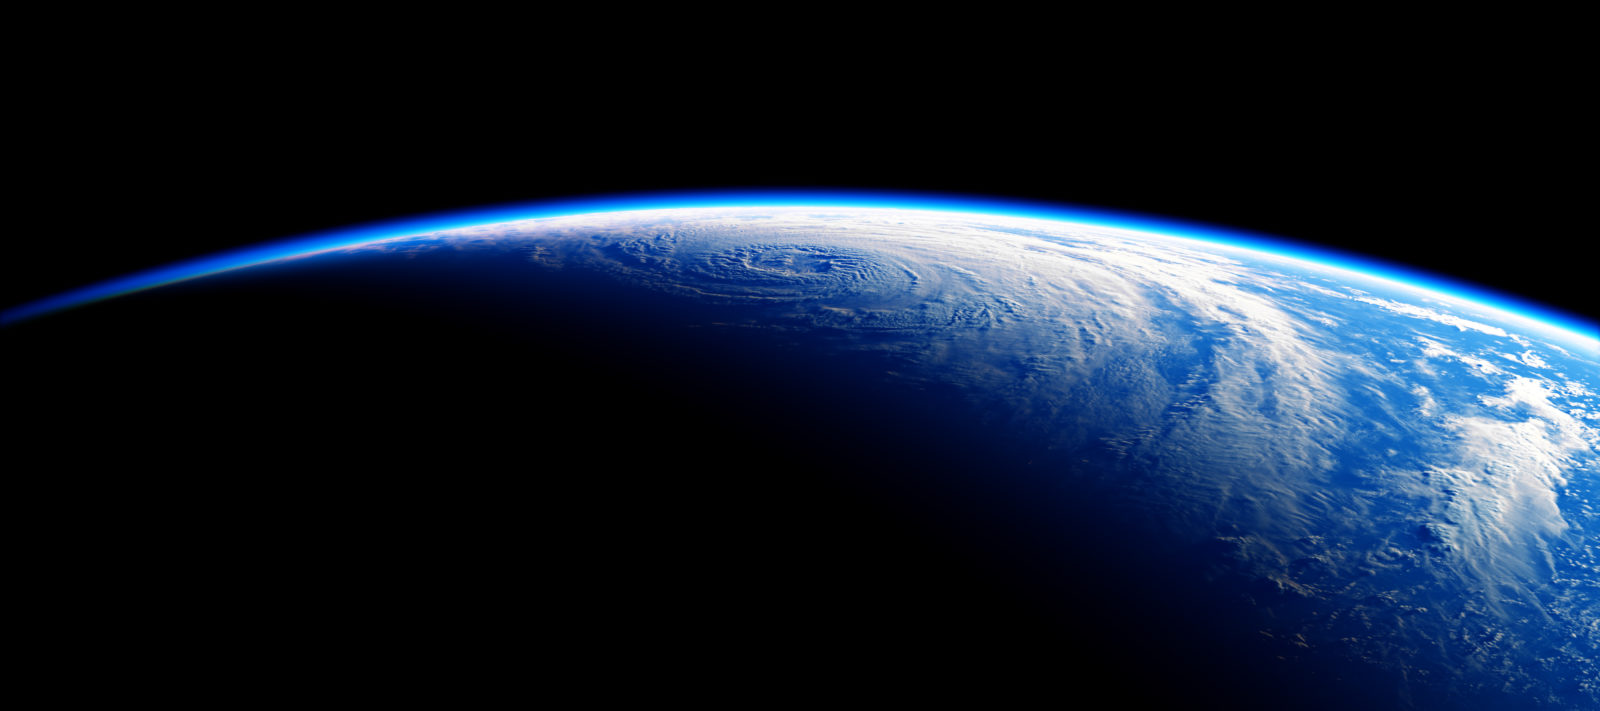 View From Space On The Blue Planet Earth. NASA Images Not Used.